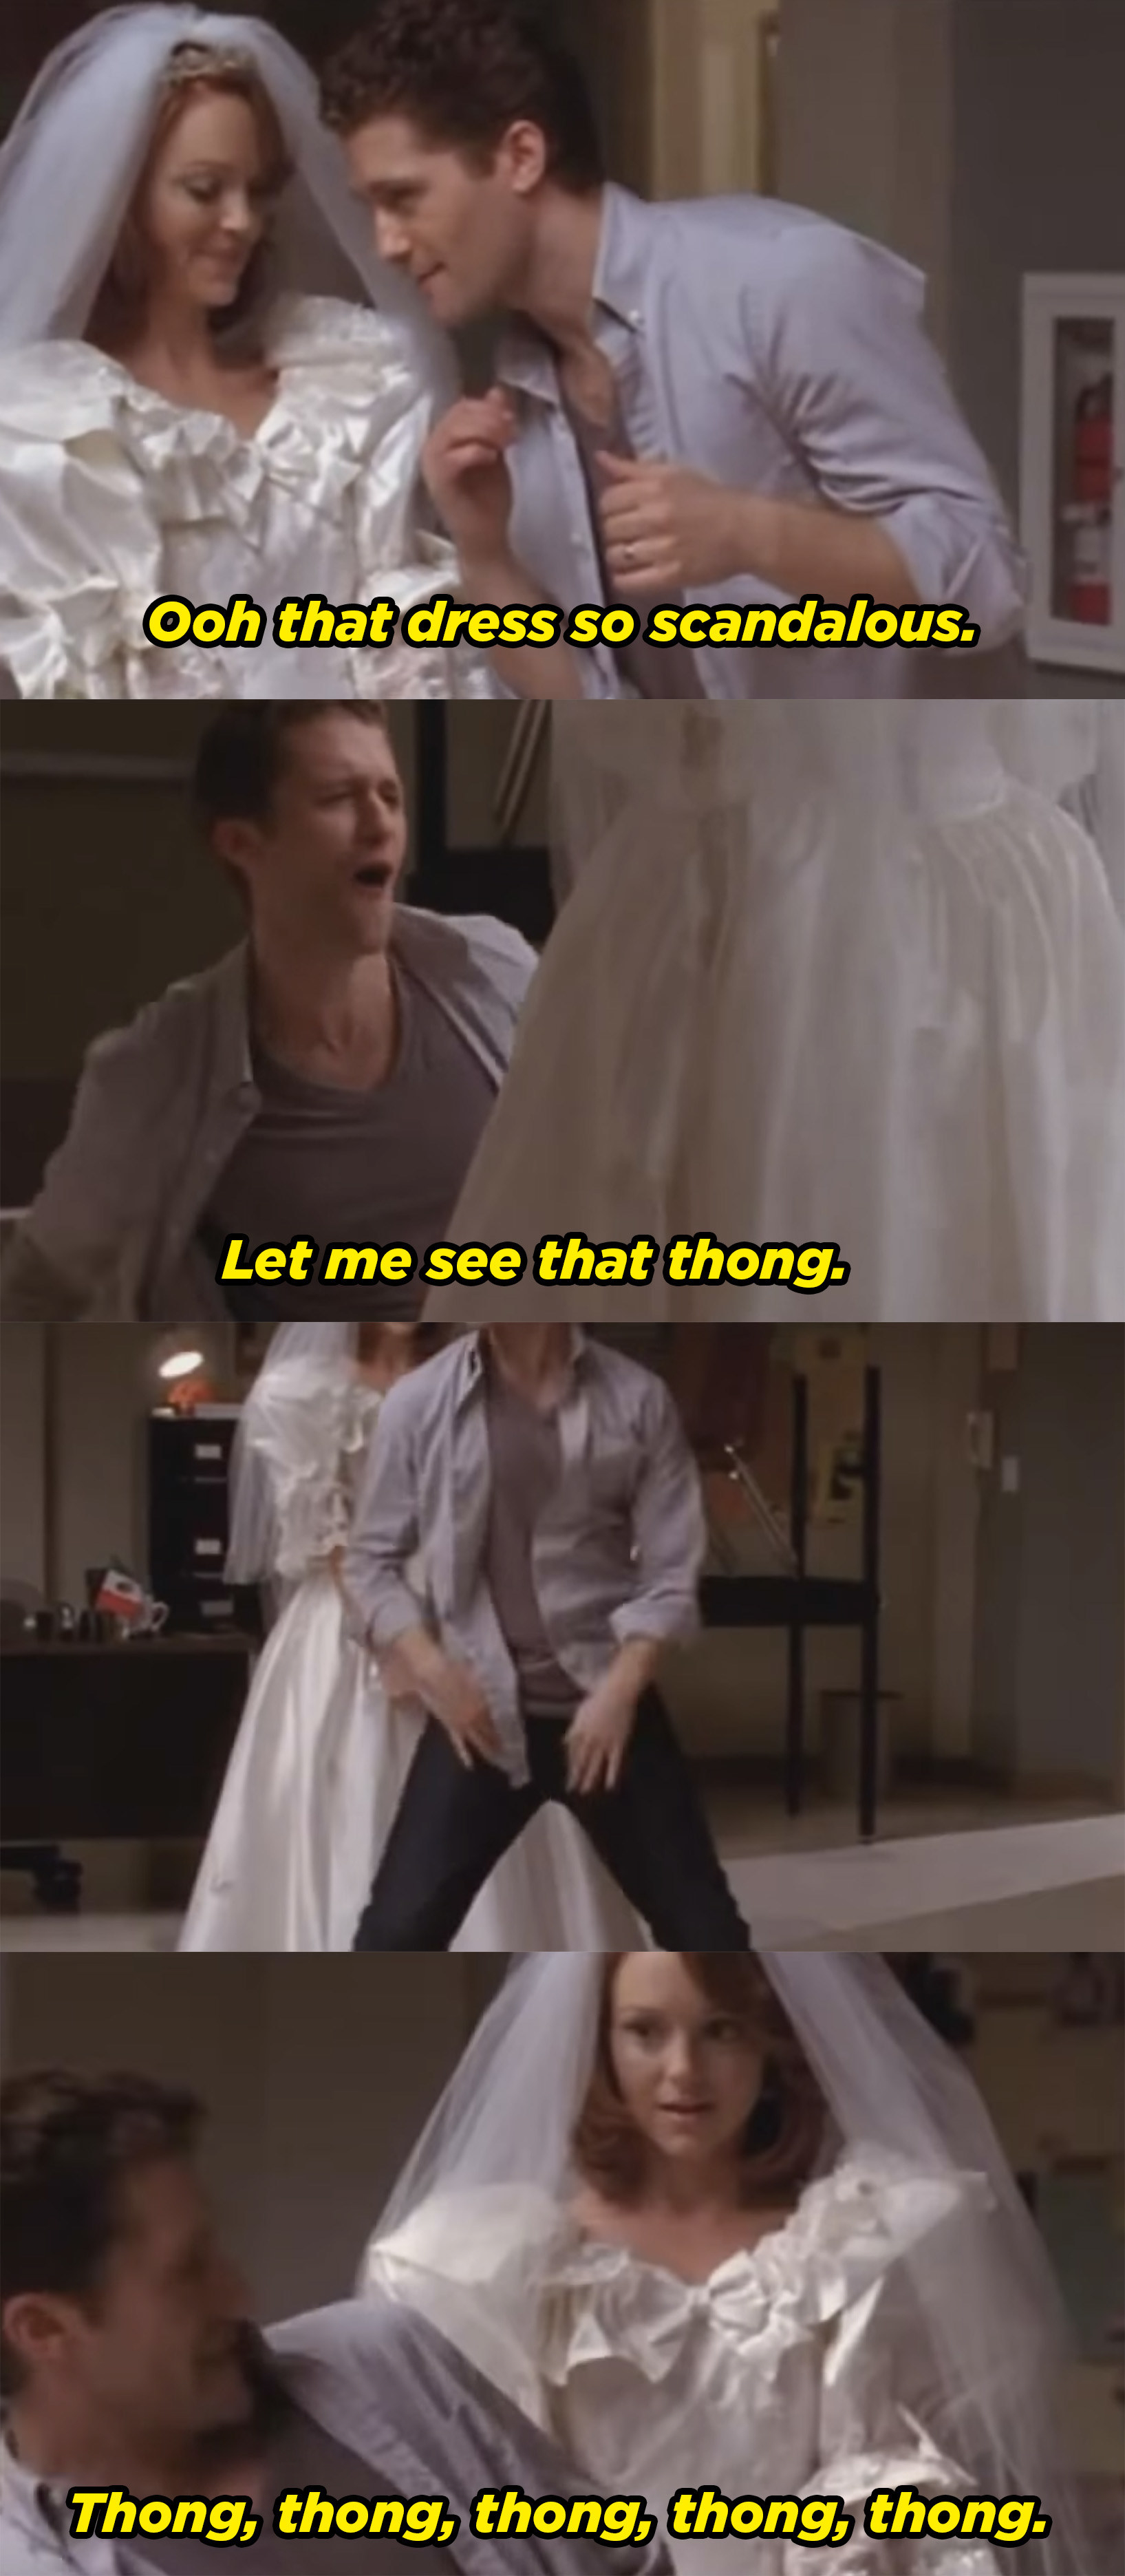 Mr. Schue singing the &quot;Thong Song&quot; to Emma while she wears Princess Di&#x27;s big poufy wedding dress.